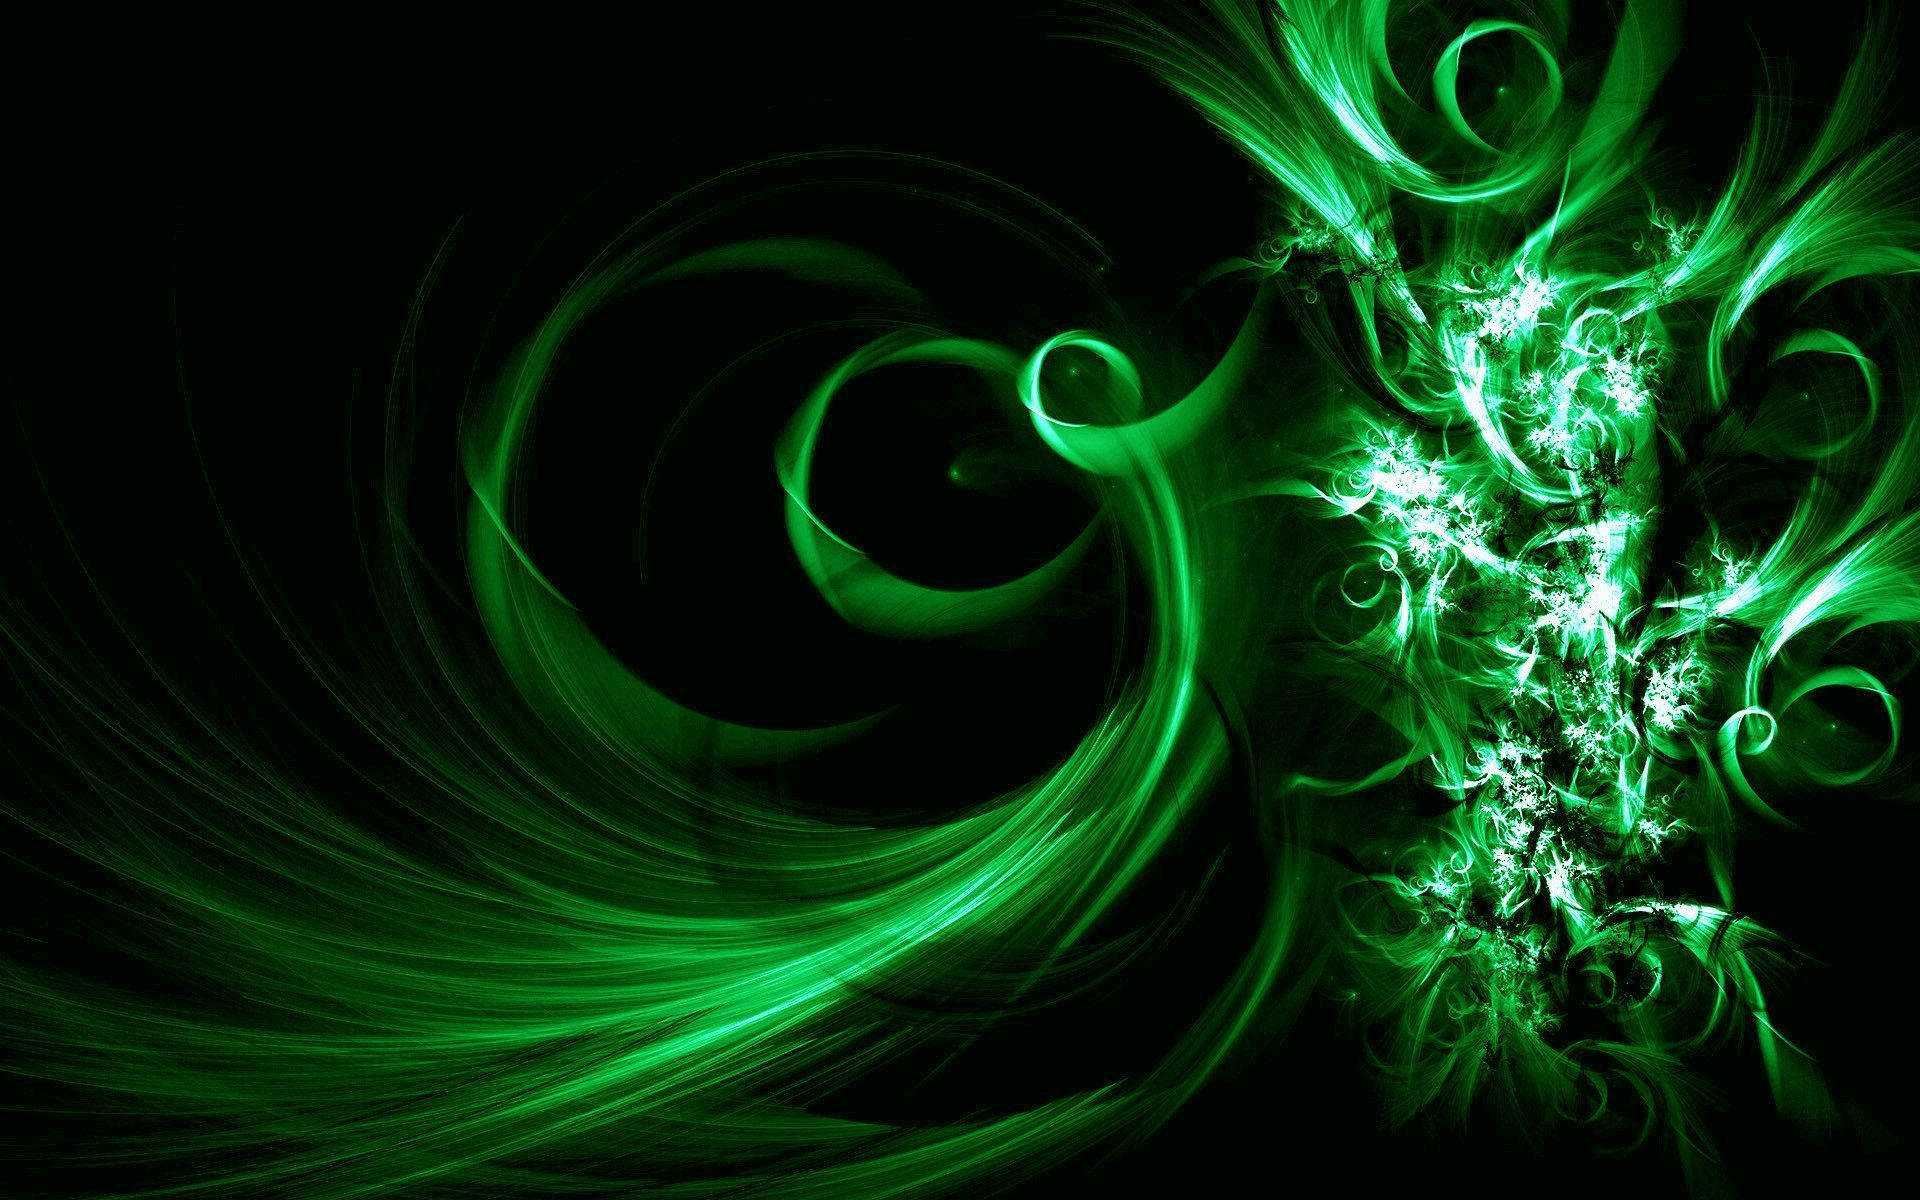 Black And Green Fire Abstract Art Wallpaper